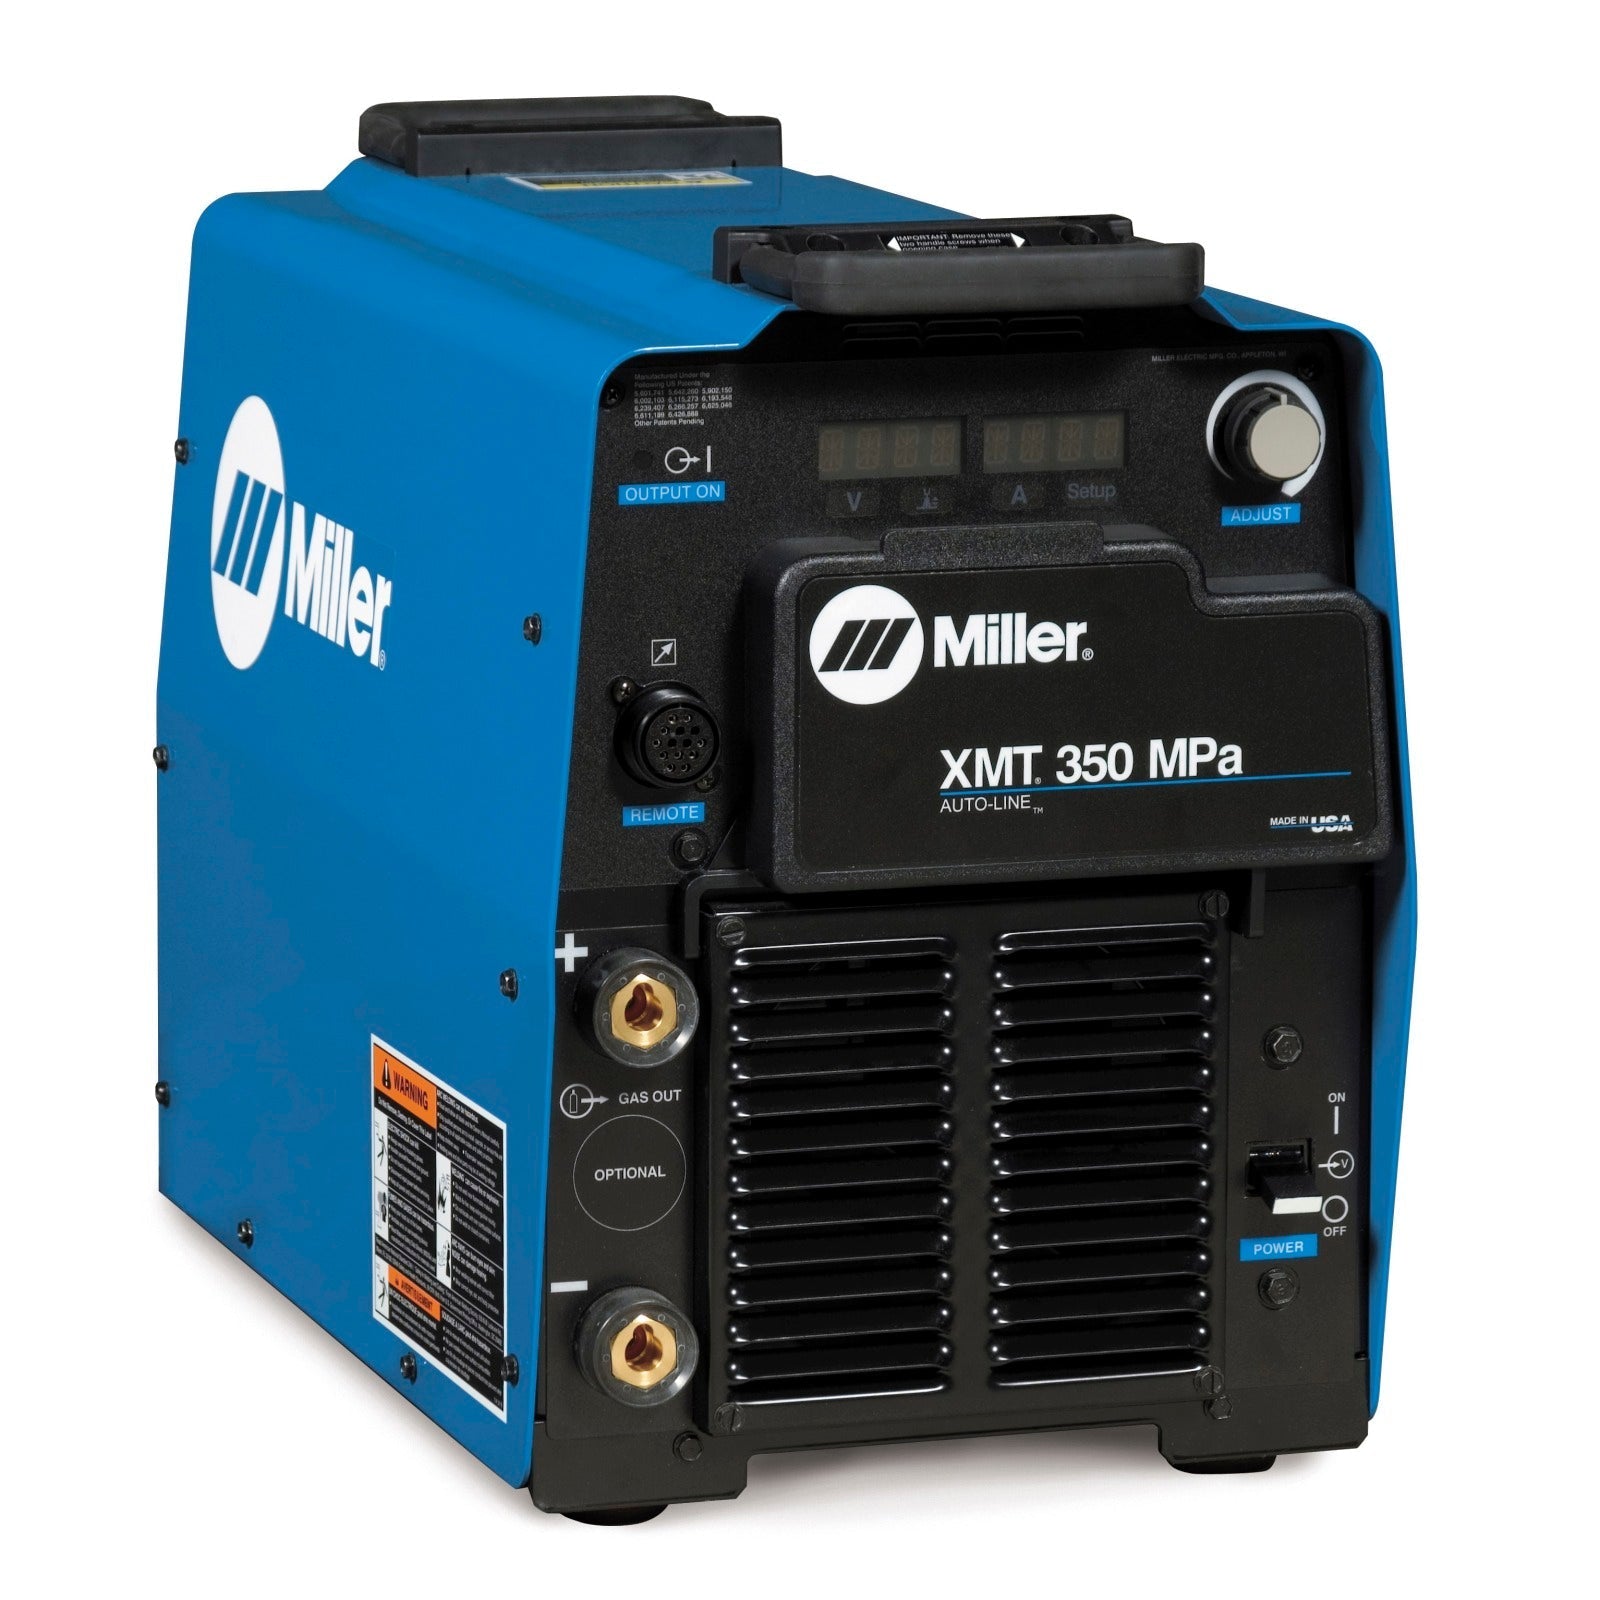 Miller XMT 350 MPa Multiprocess Welder with Auxiliary Power - 907366011